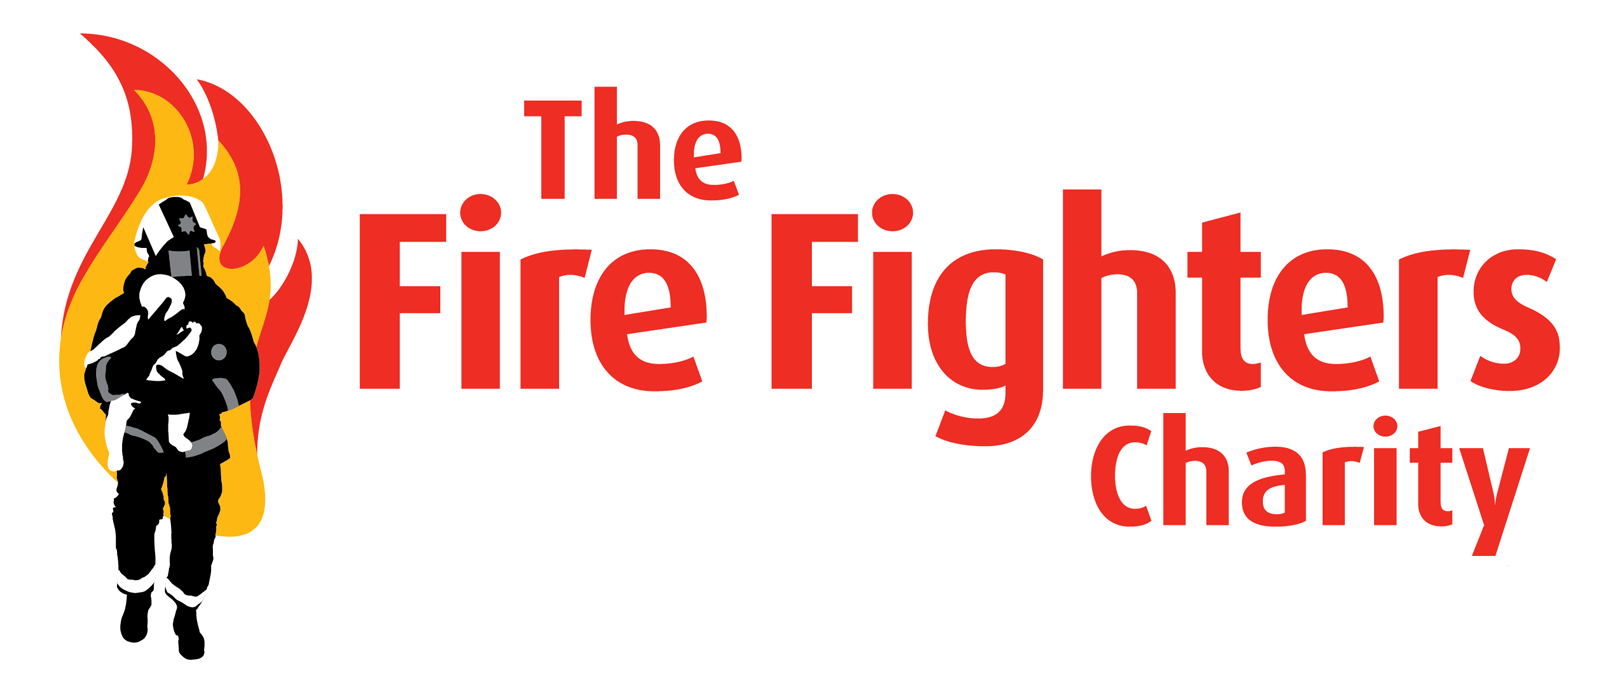 The Fire Fighter Charity